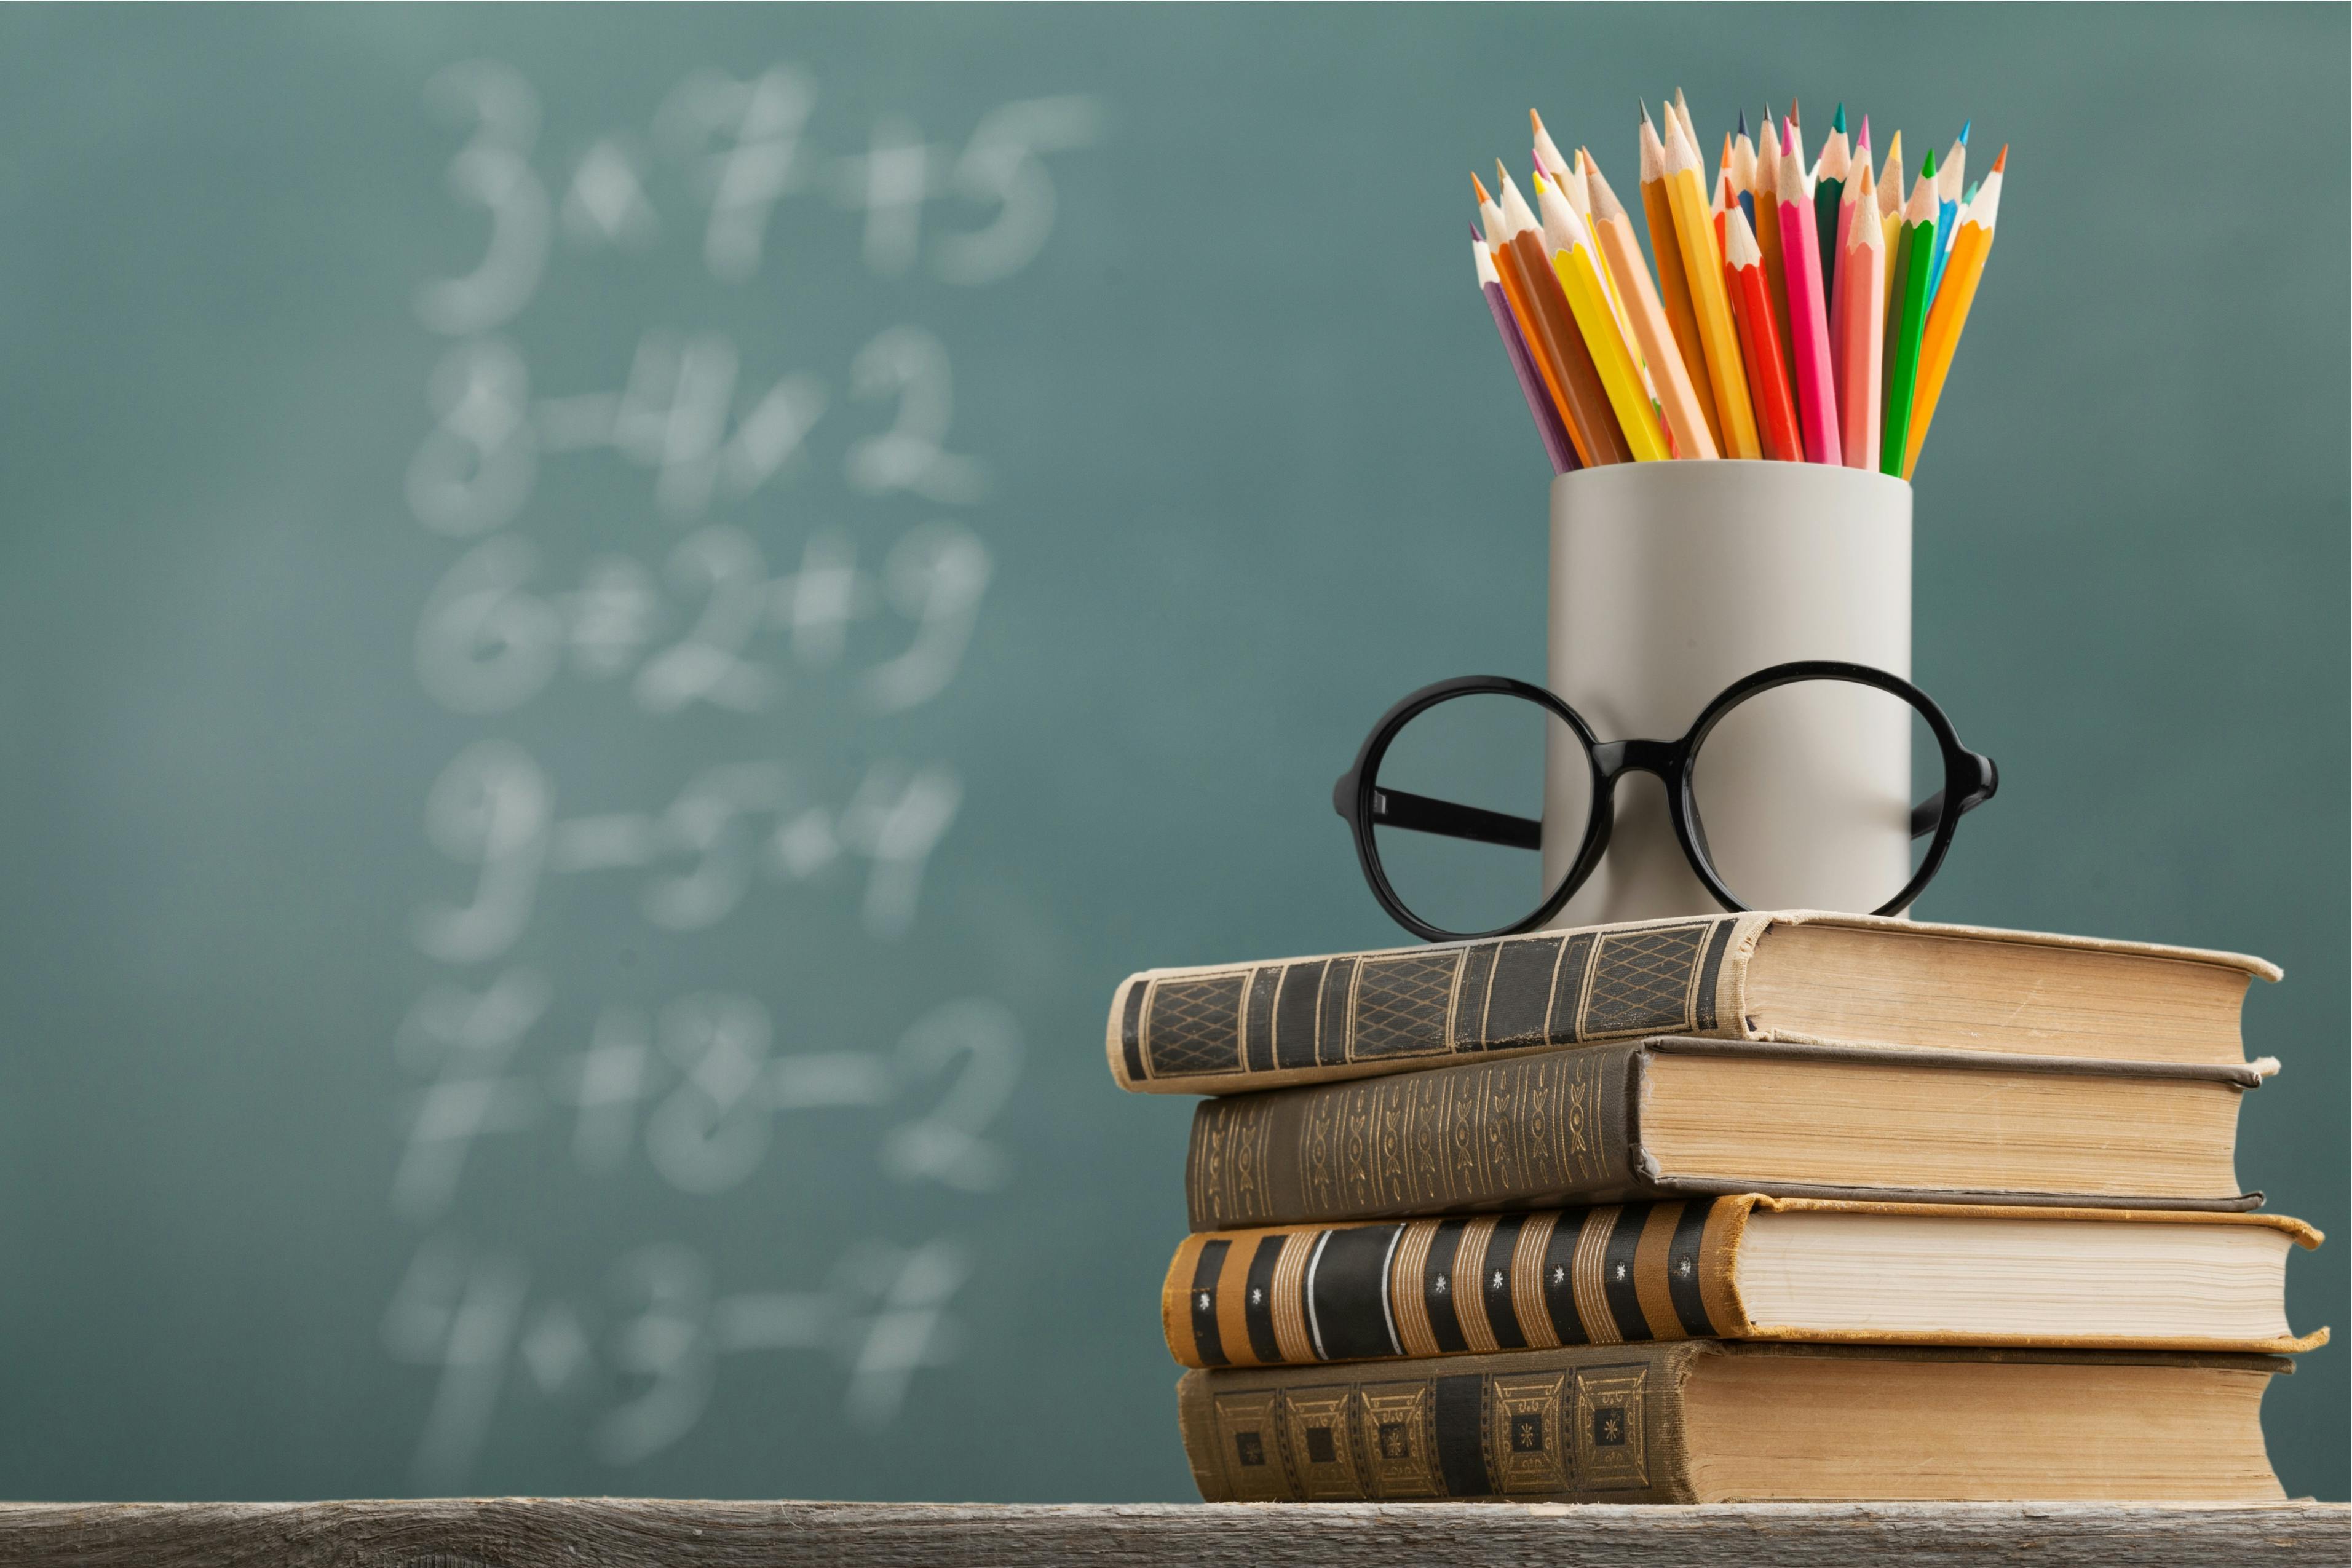 A school scene is shown, with glasses and a cup of pencils stacked on a stack of books, with a chalkboard with math problems in the background